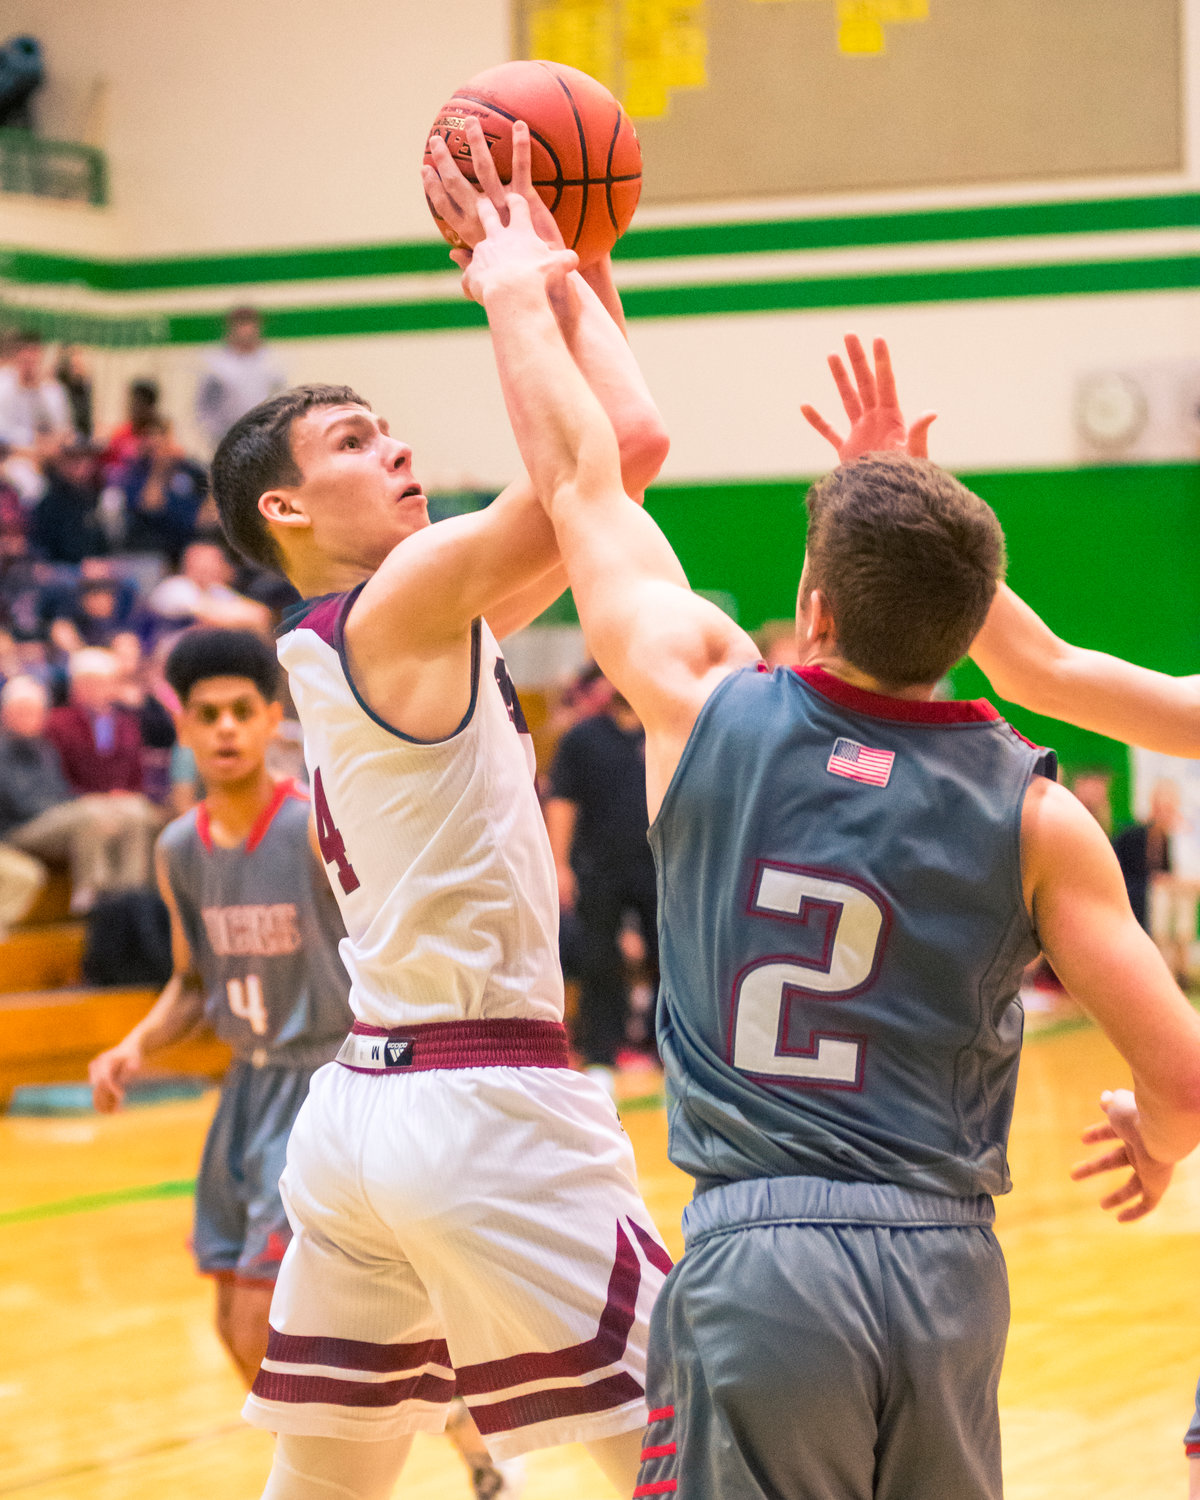 W.F. West's Cade Haller (4) attempts to shoot during a game against Jacks Thursday night at Tumwater High School.